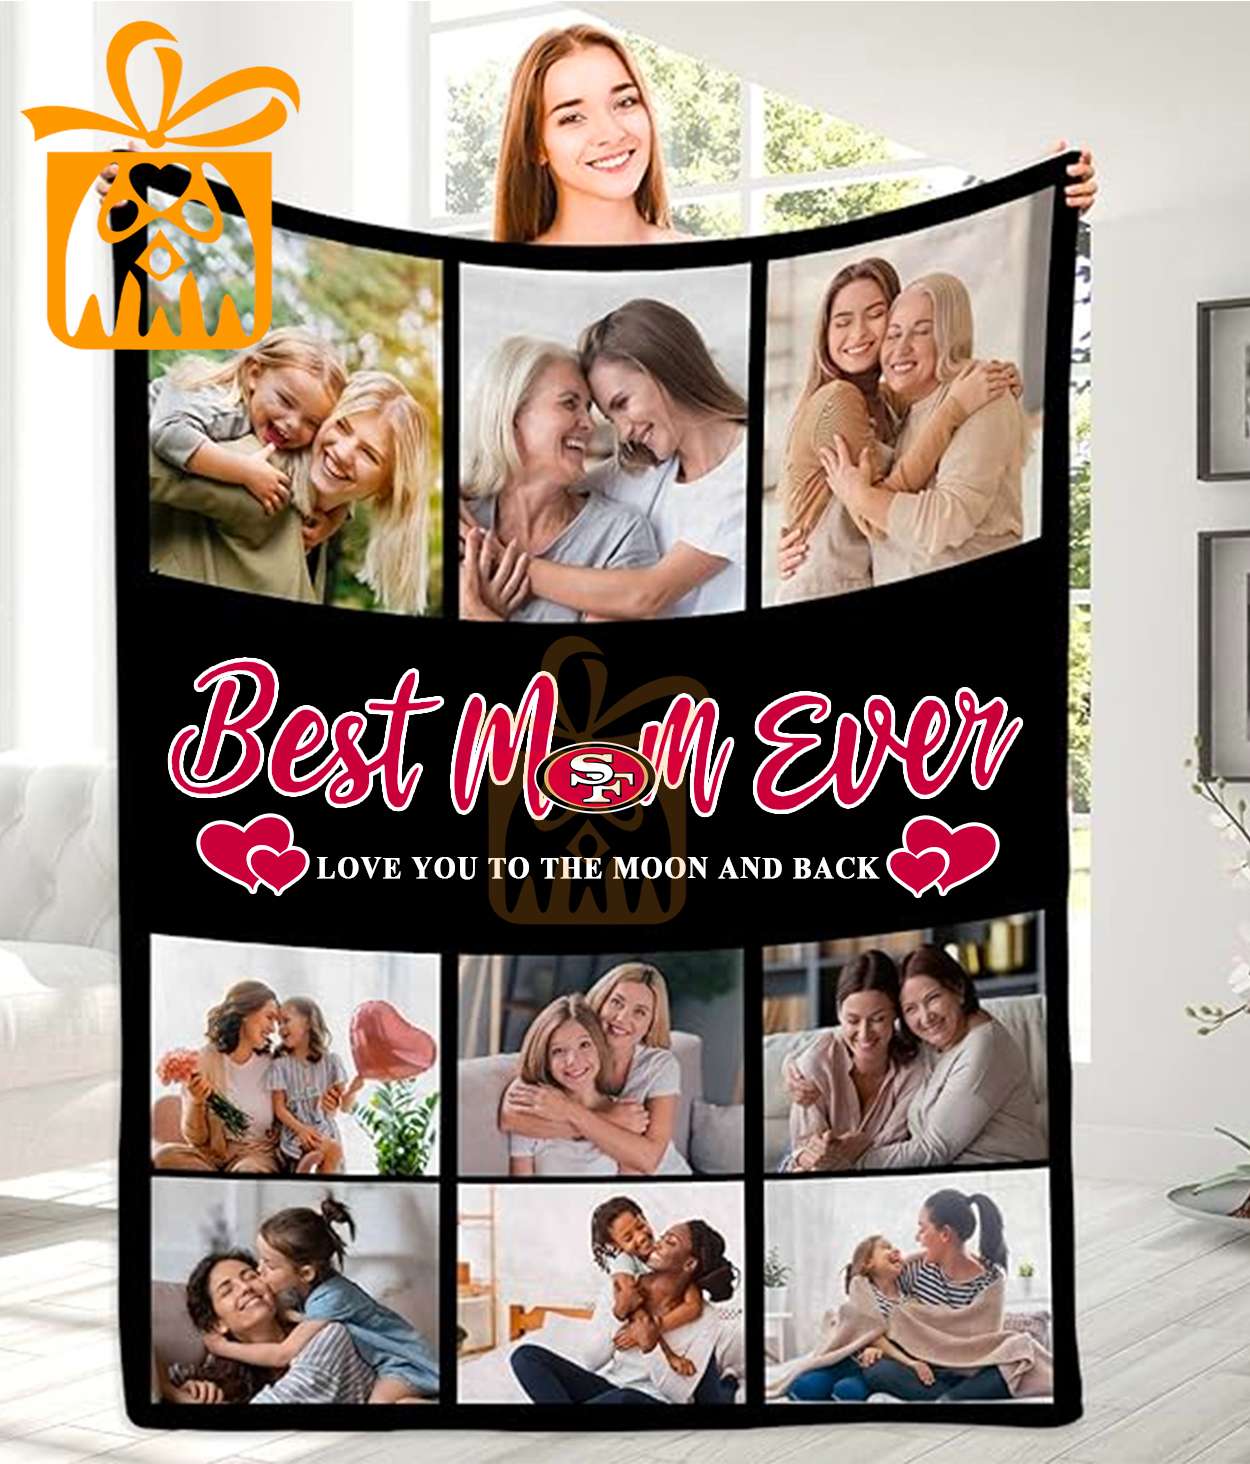 Best Mom Ever Custom NFL San Francisco 49ers Blankets with Pictures - Perfect Mother’s Day Gift